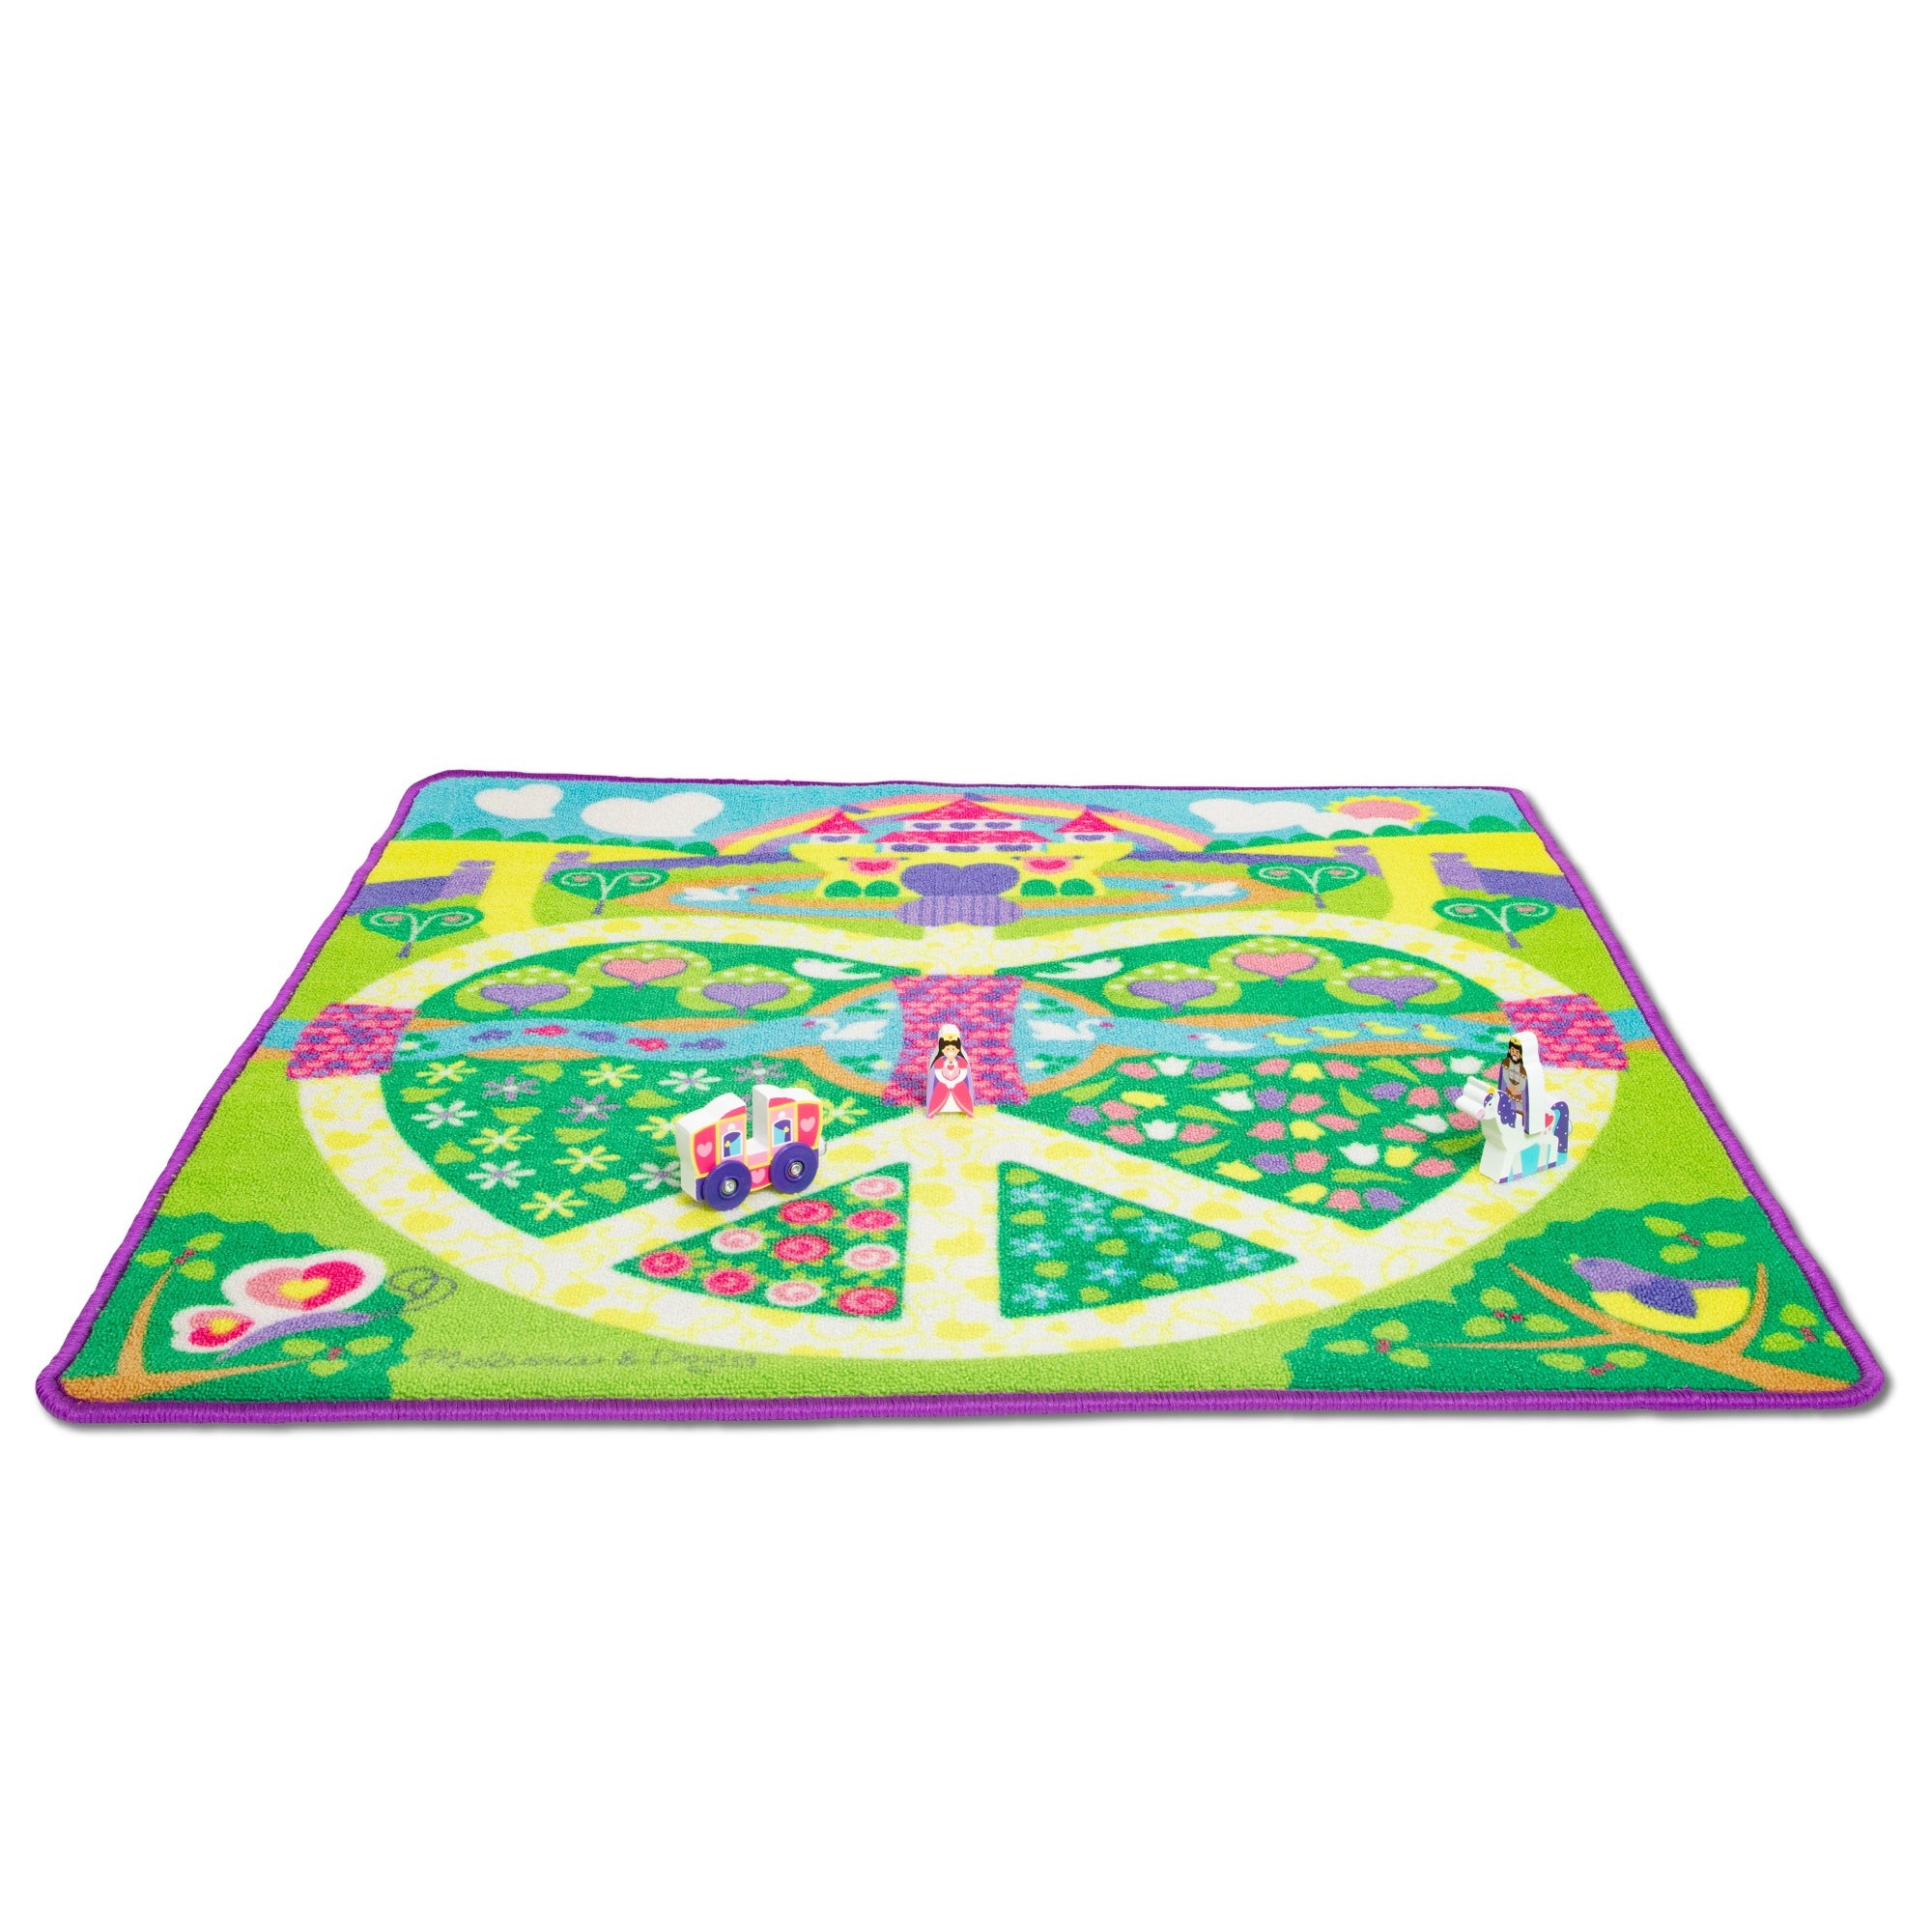 Magical Kingdom Activity Rug Ages 3-5 Years